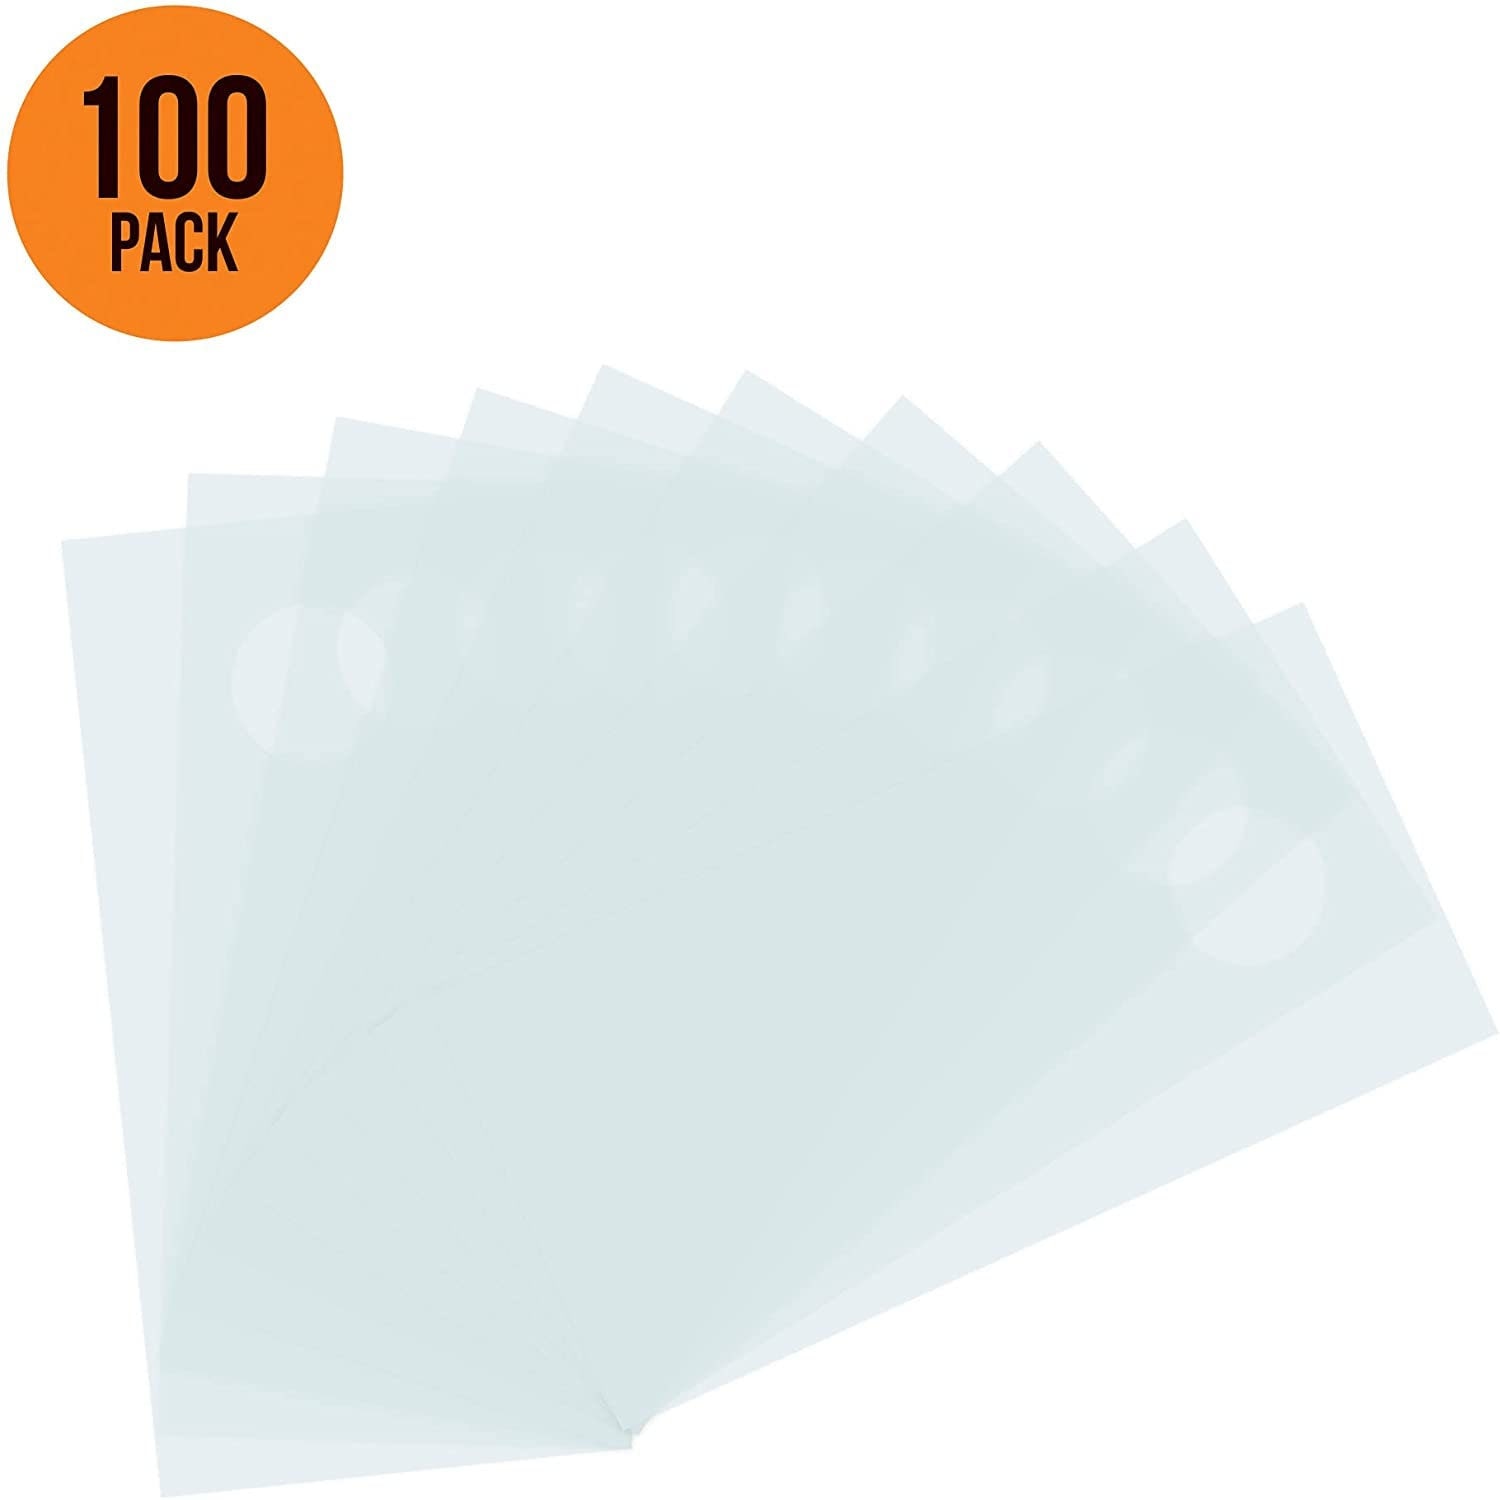 Clear Frosted Plastic Gift Bags, Market 12x6x12, 25 Pack, 3 Mil